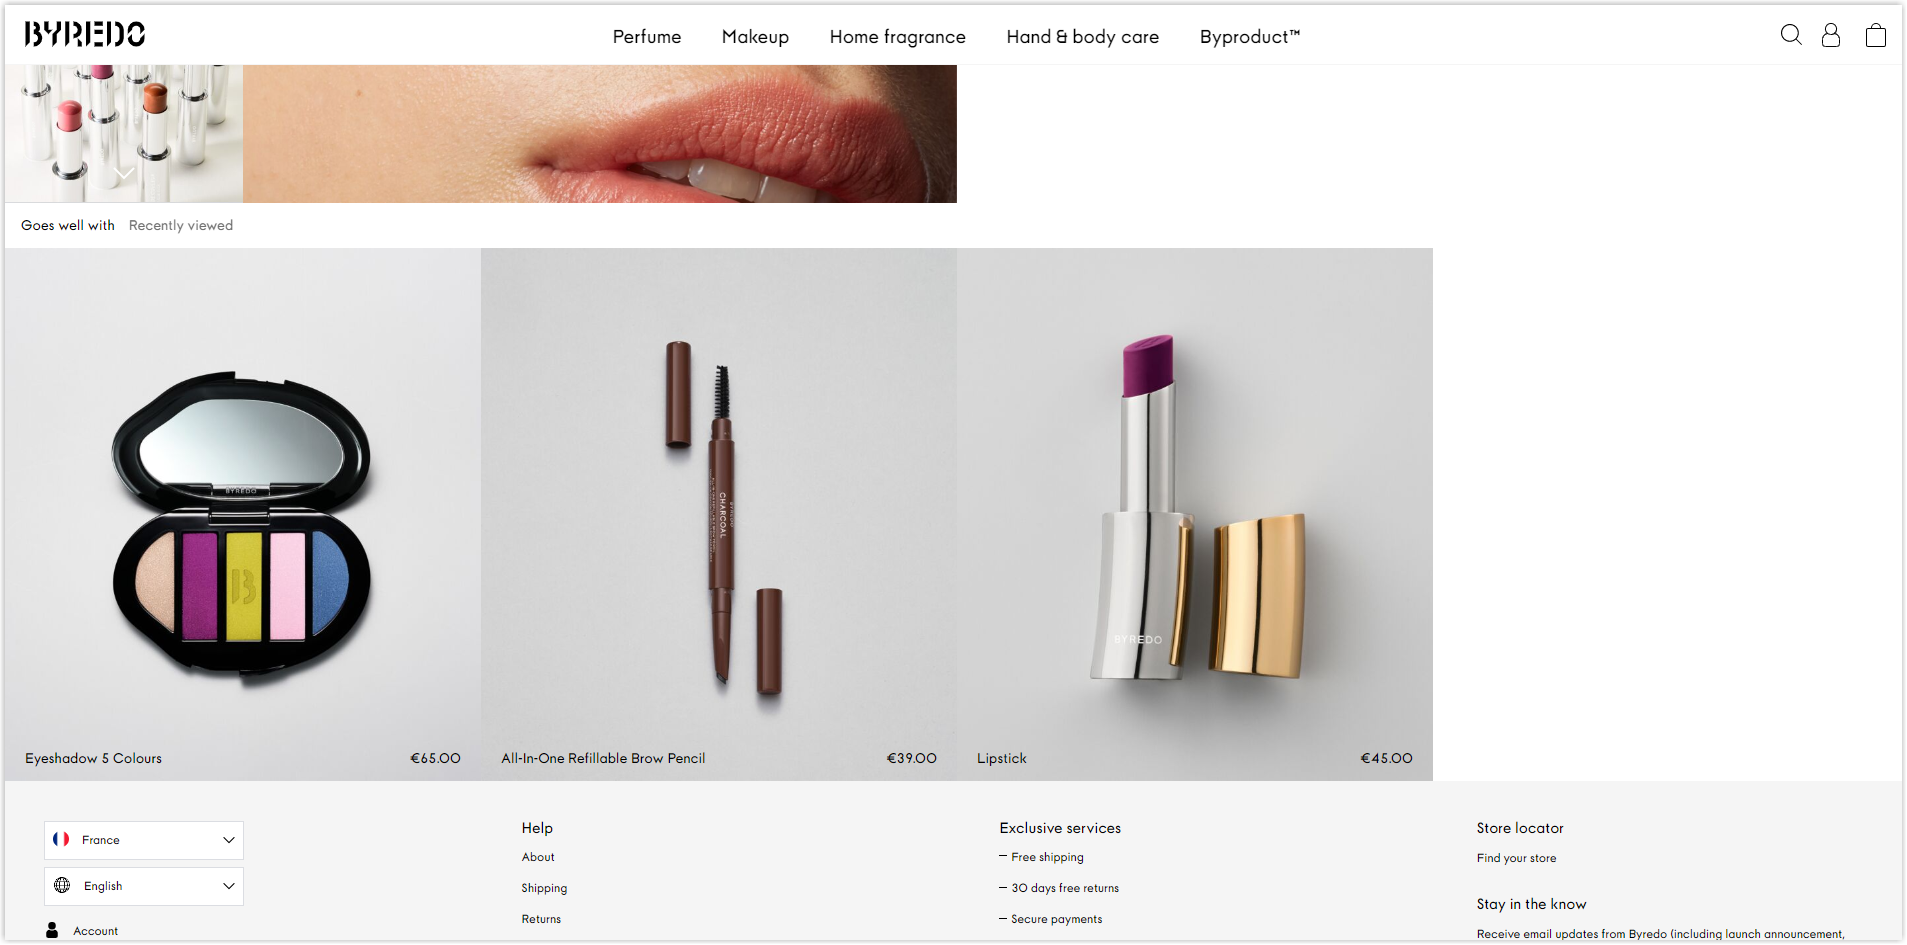 byredo product page goes well with